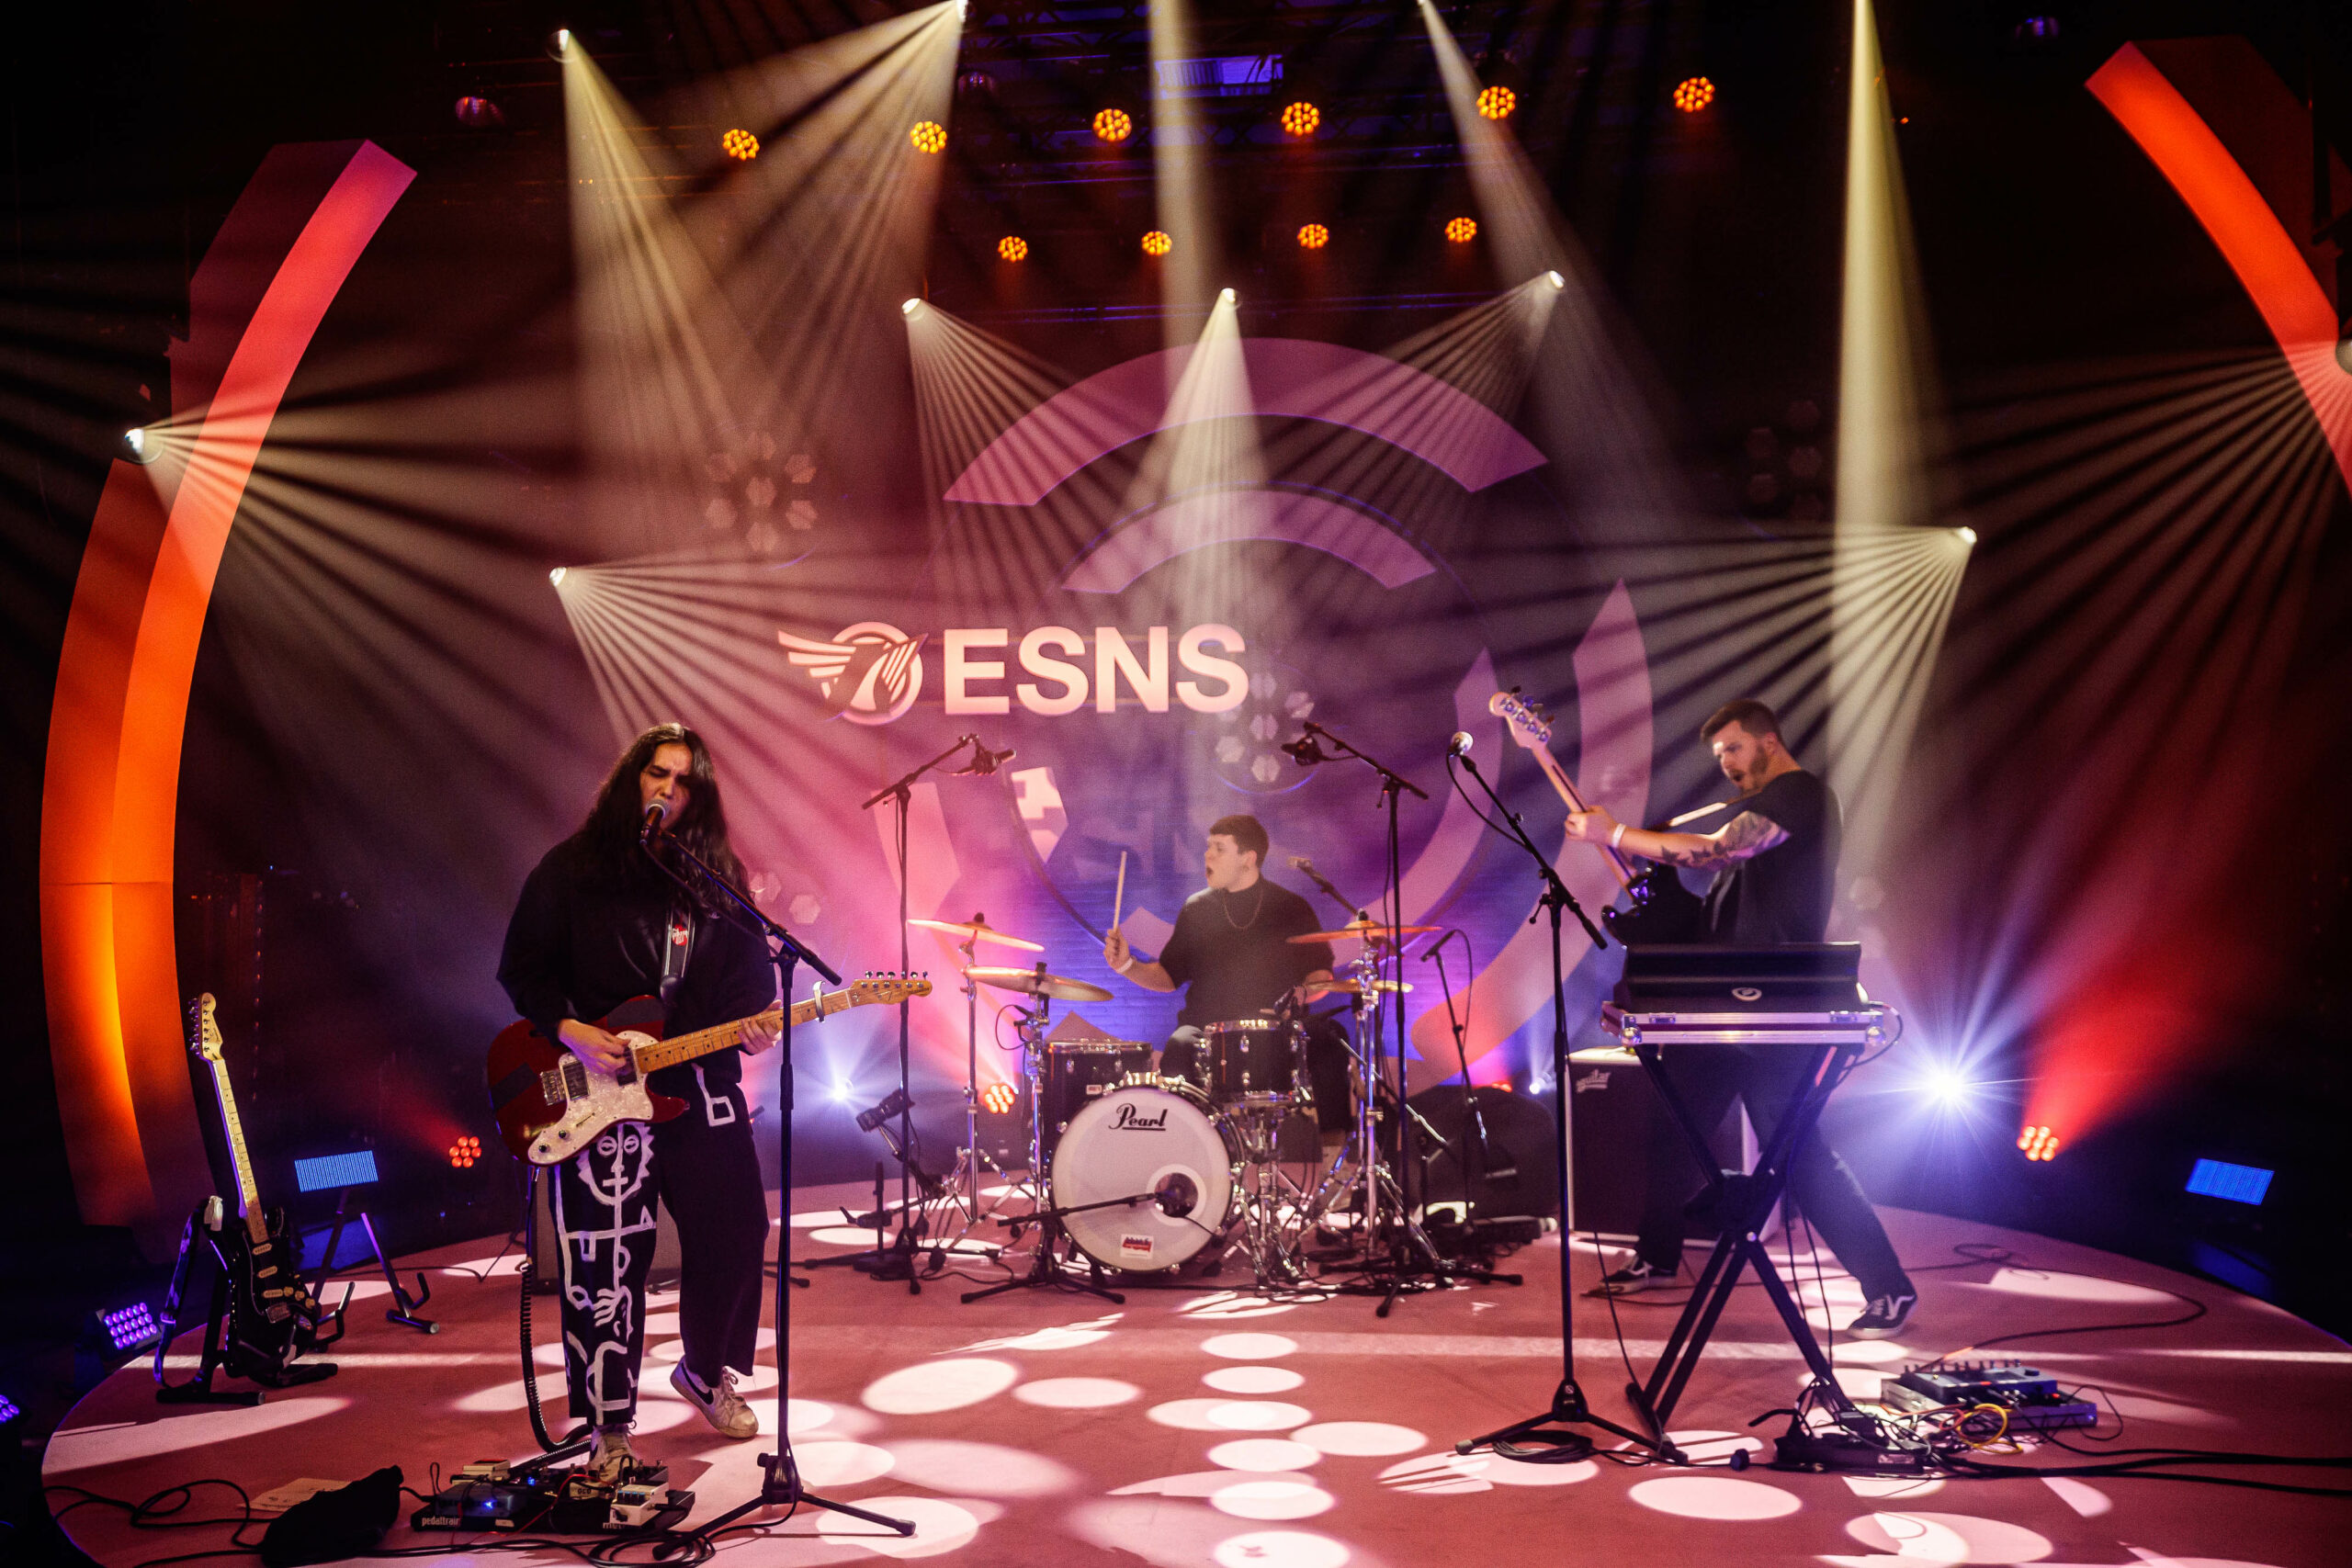 About Francis of Delirium's performance at ESNS 2022